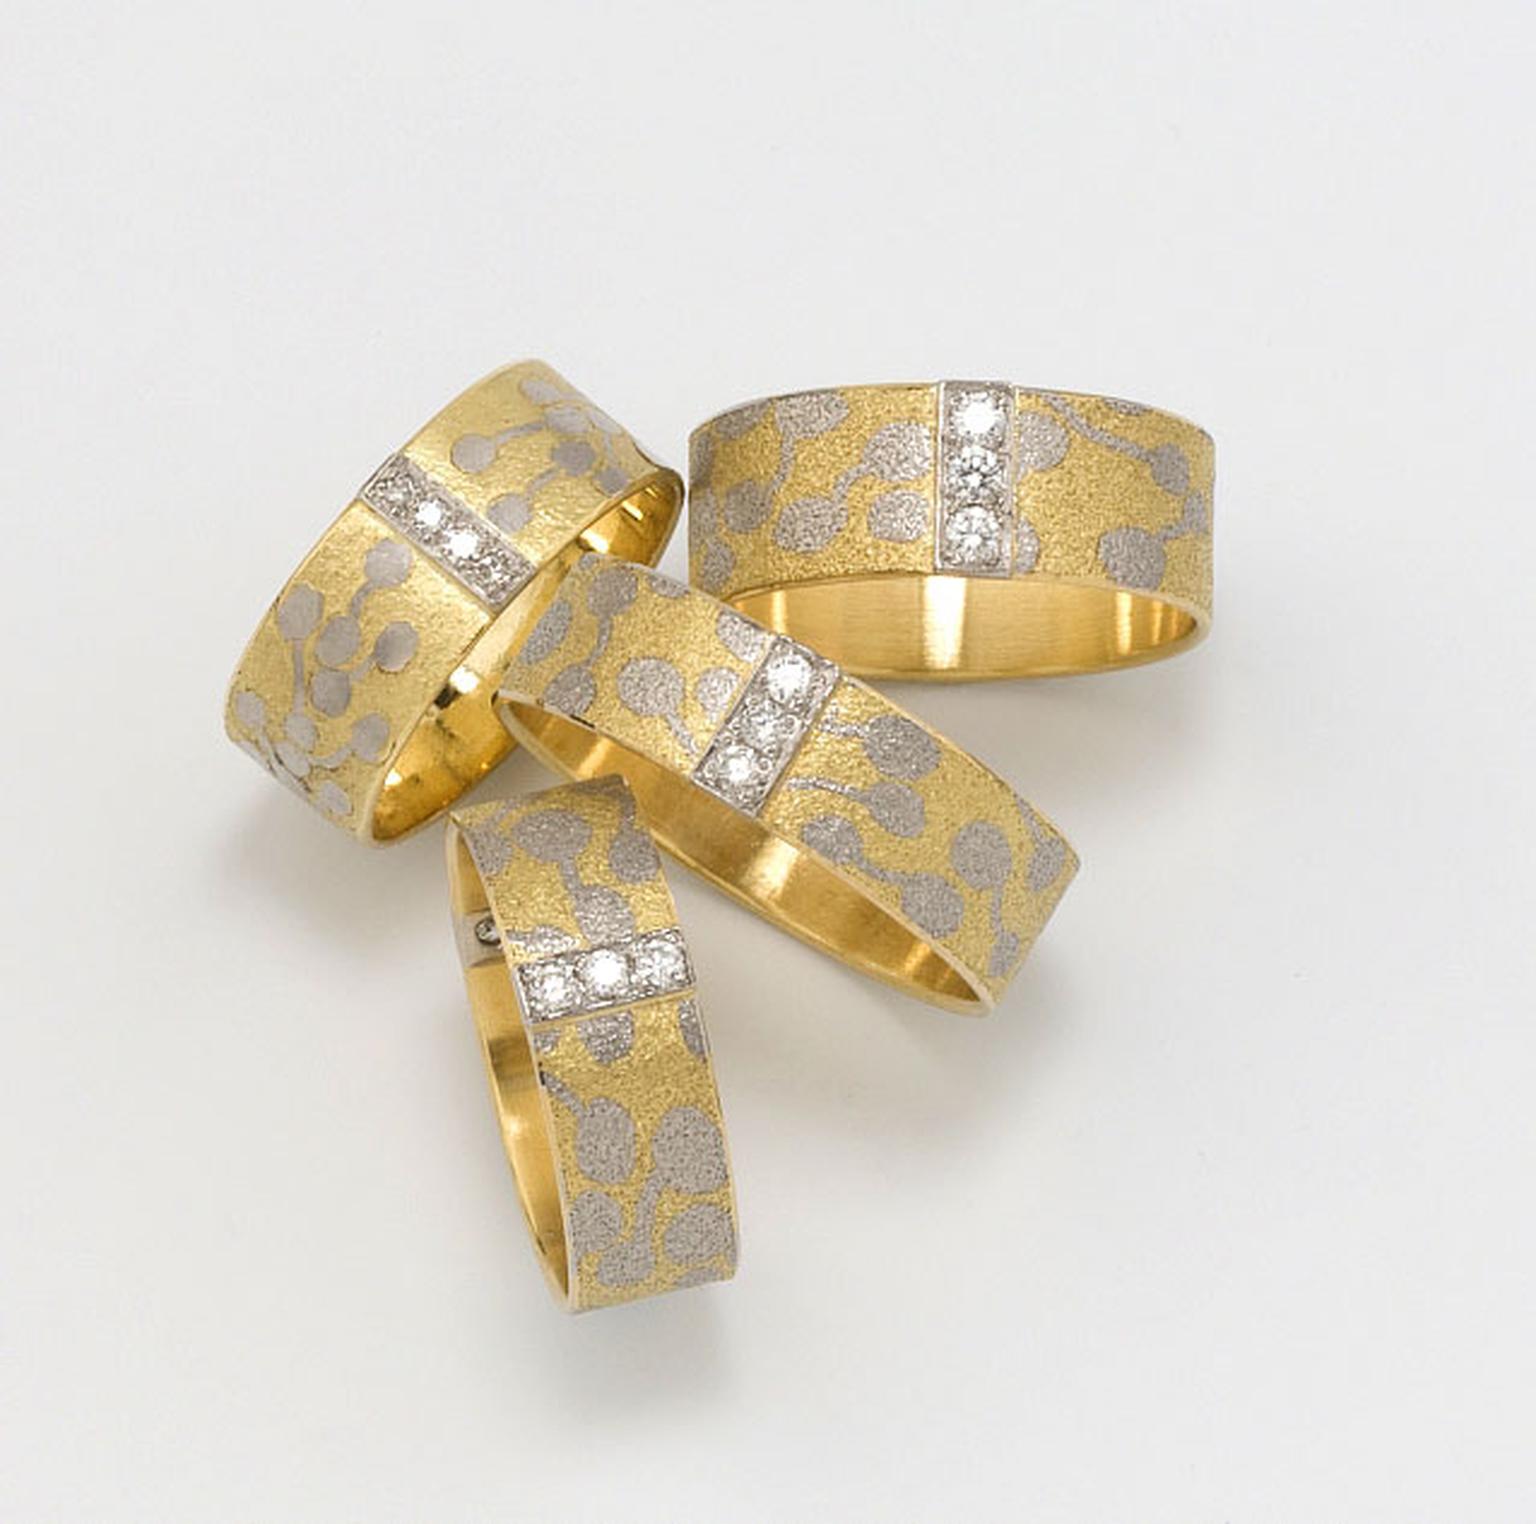 Kath Libbert. Jacqueline-Mina_Selection-of-Rings-18ct-Gold-with-Platinum-Fusion-inlay-and-Diamonds